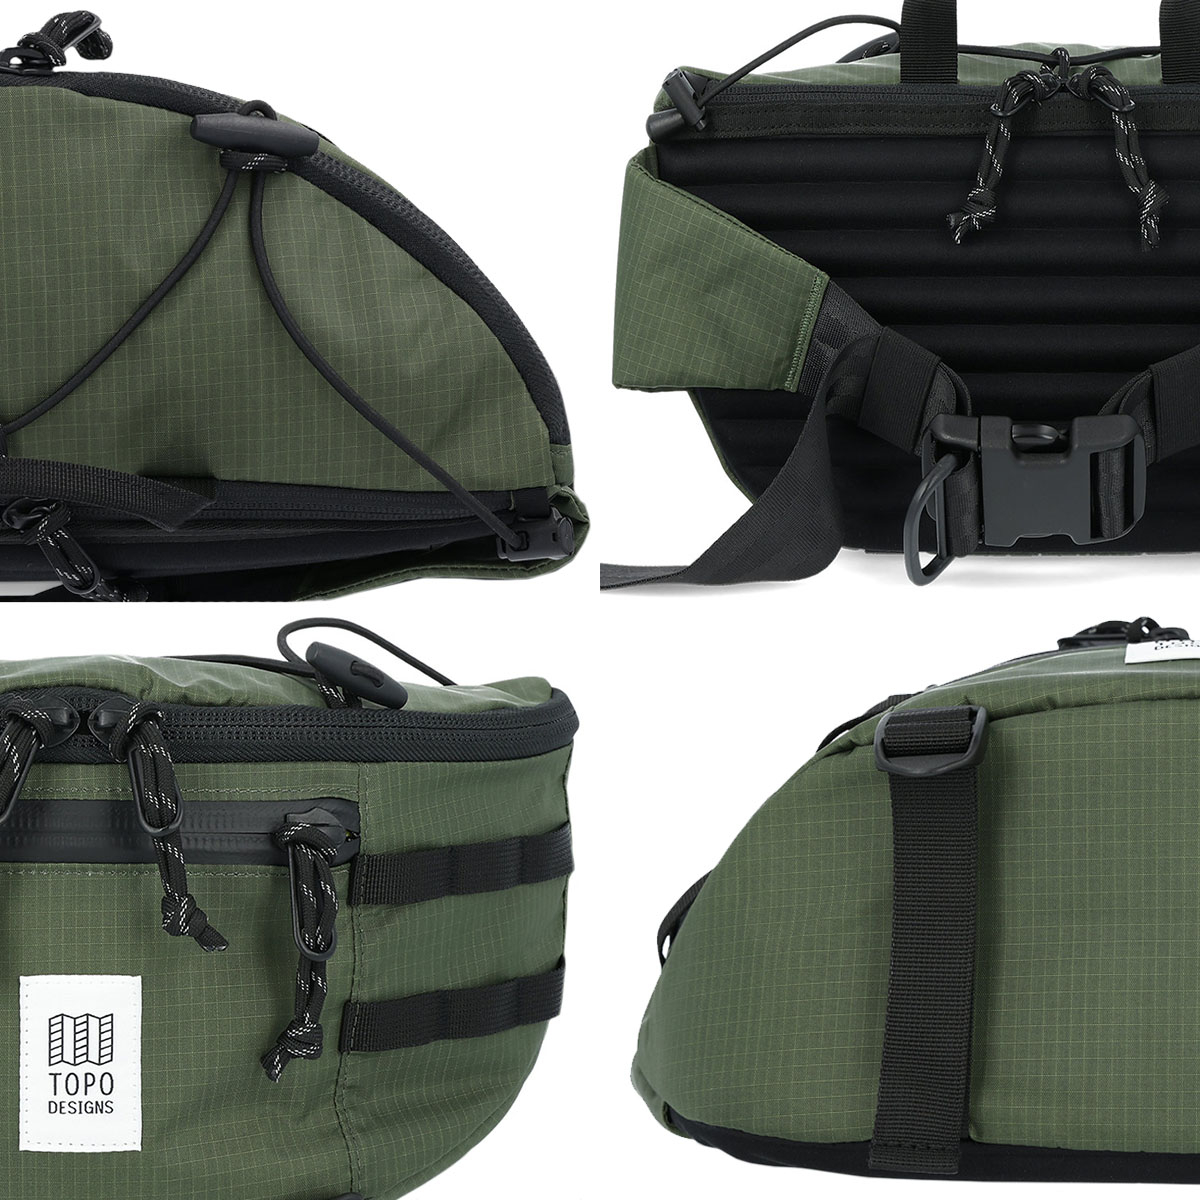 Topo Designs Mountain Sling Bag Olive, carrying options